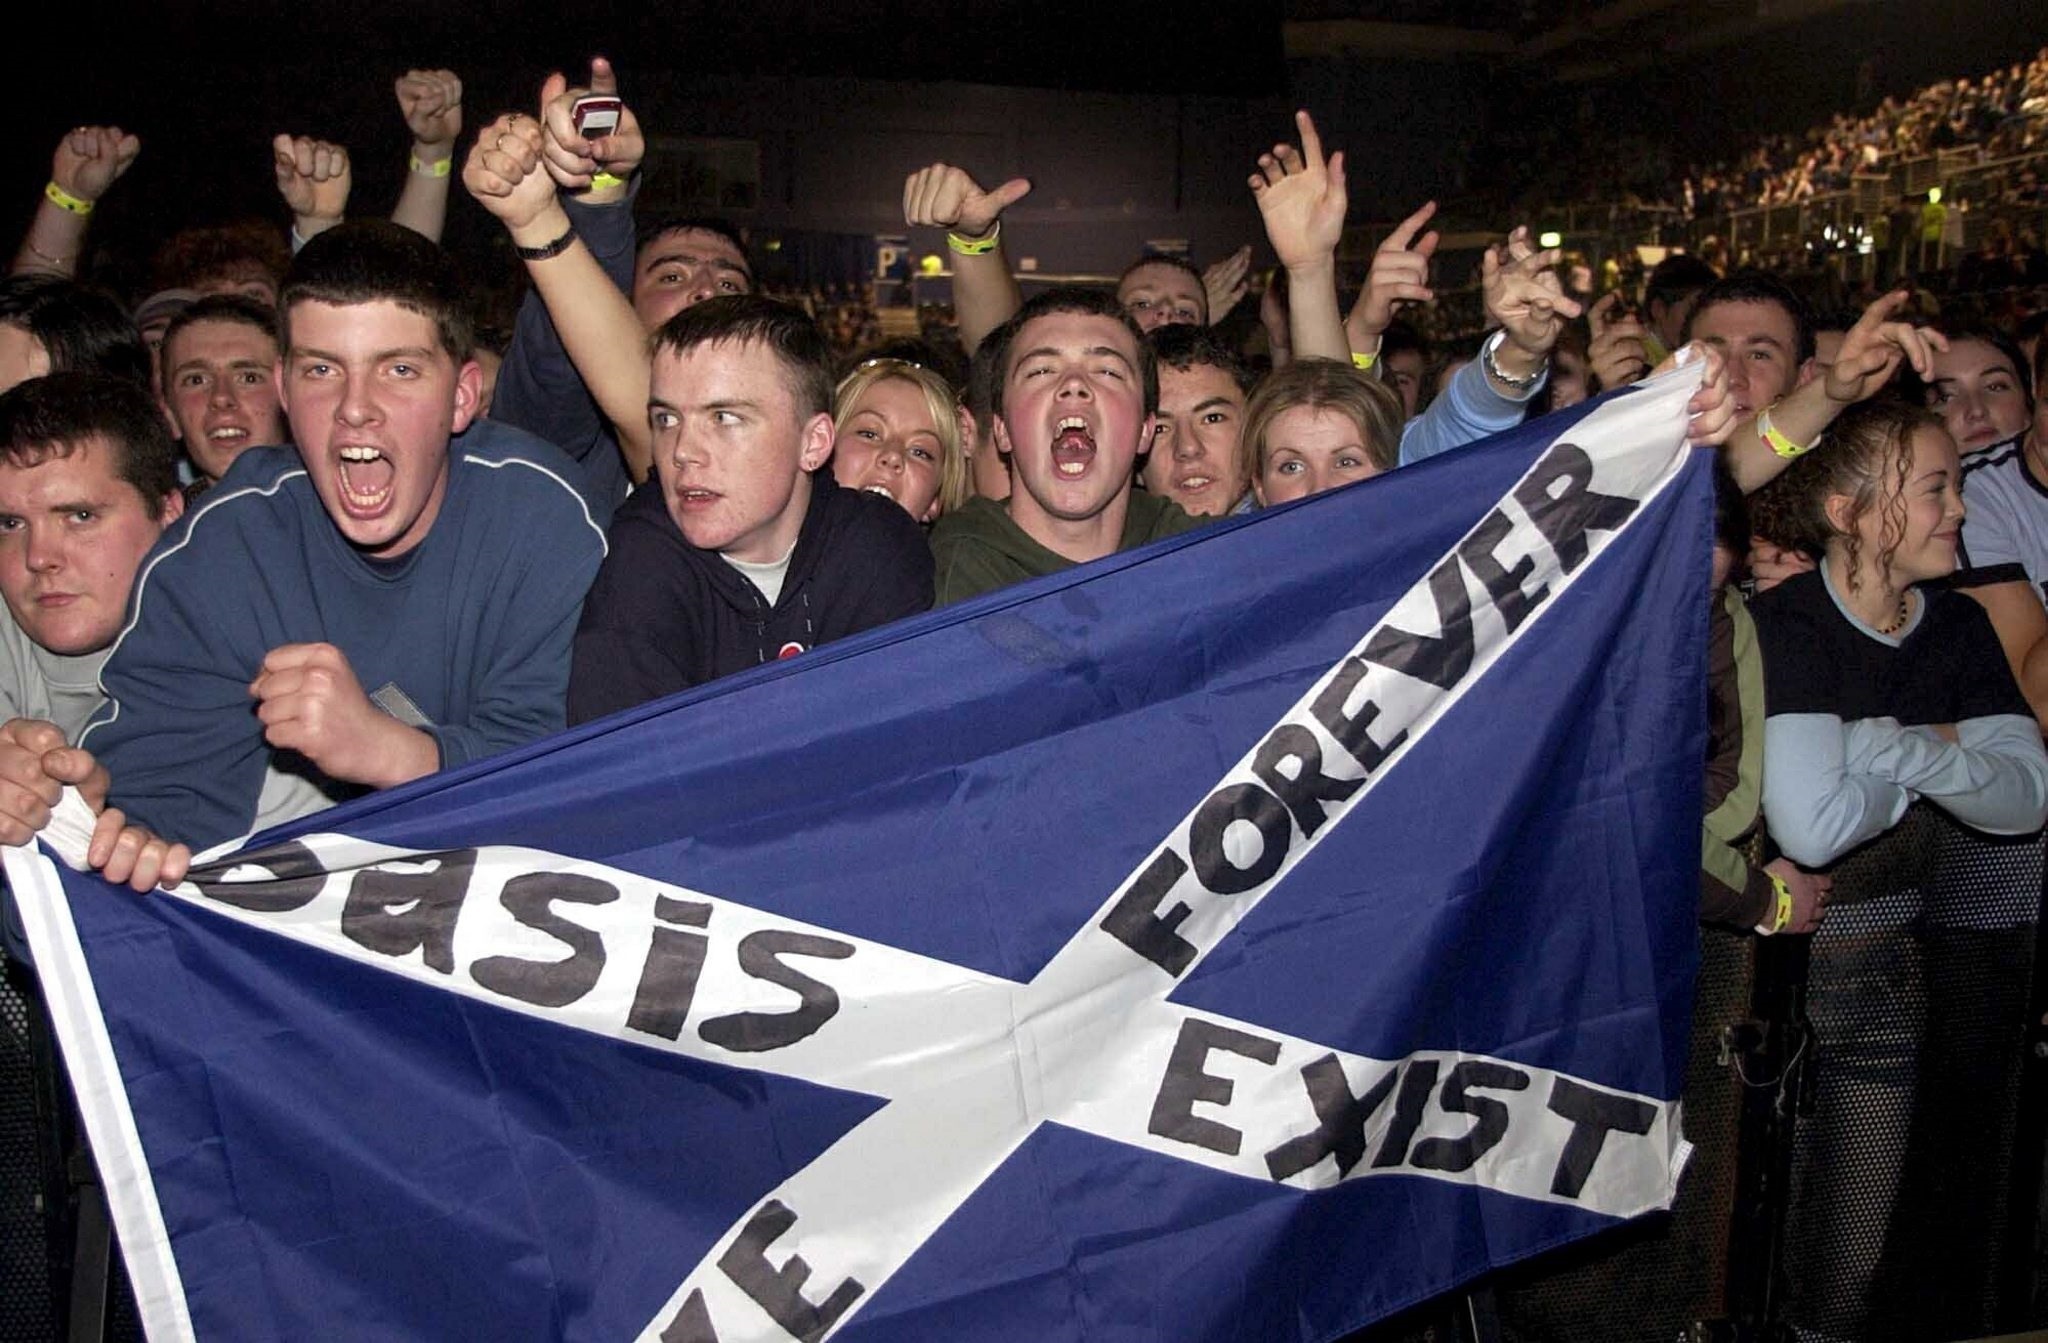 Oasis fans in 2002. Pic: Herald and Times